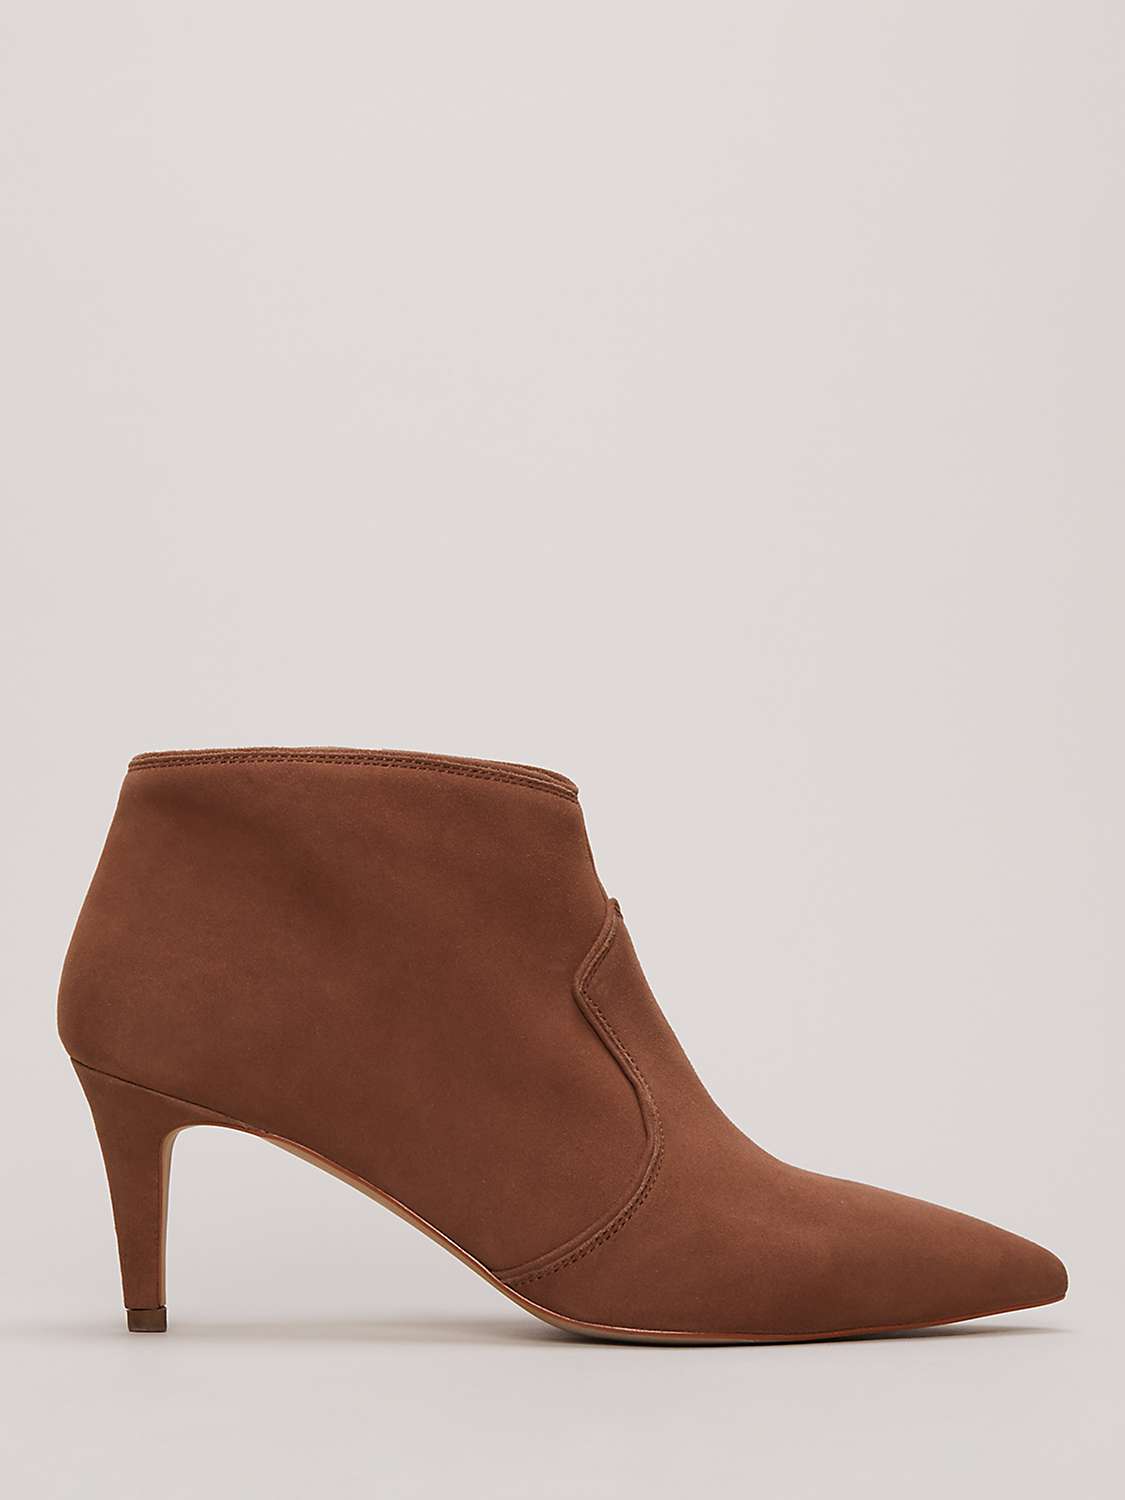 Buy Phase Eight Suede Shoe Boots, Tan Online at johnlewis.com